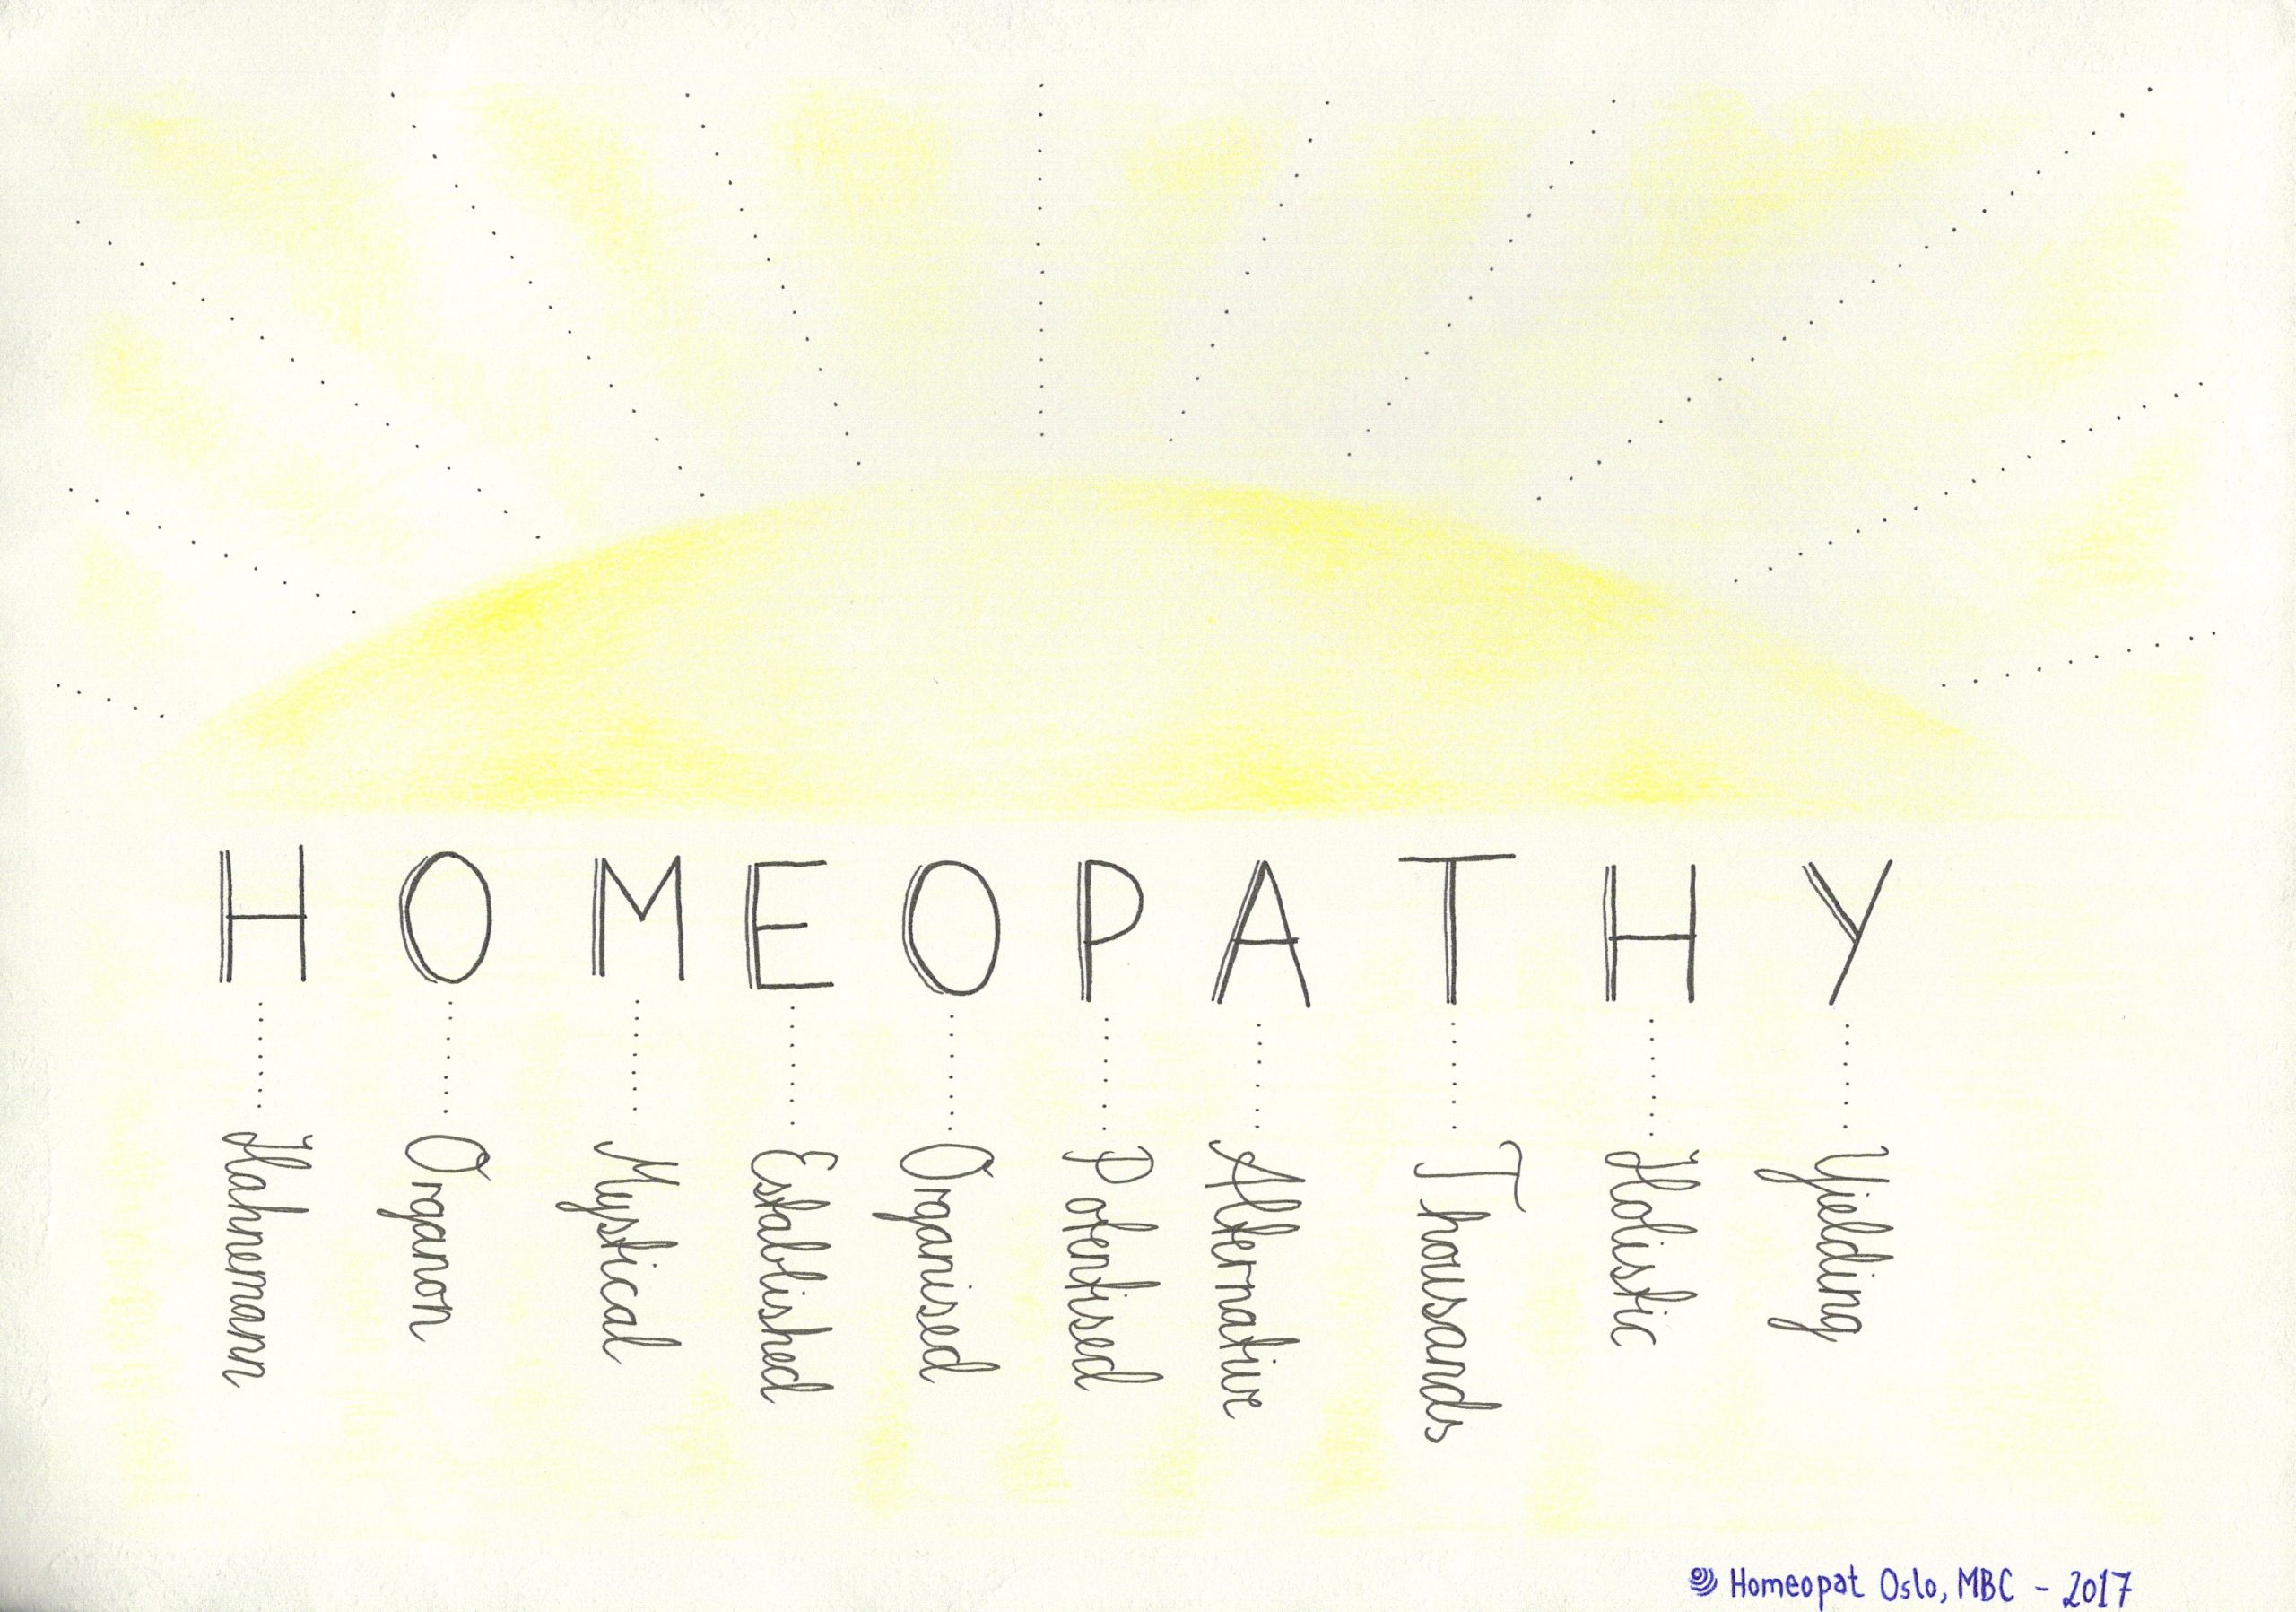 Illustration showing a sun, with 10 keywords characterising homoeopathy